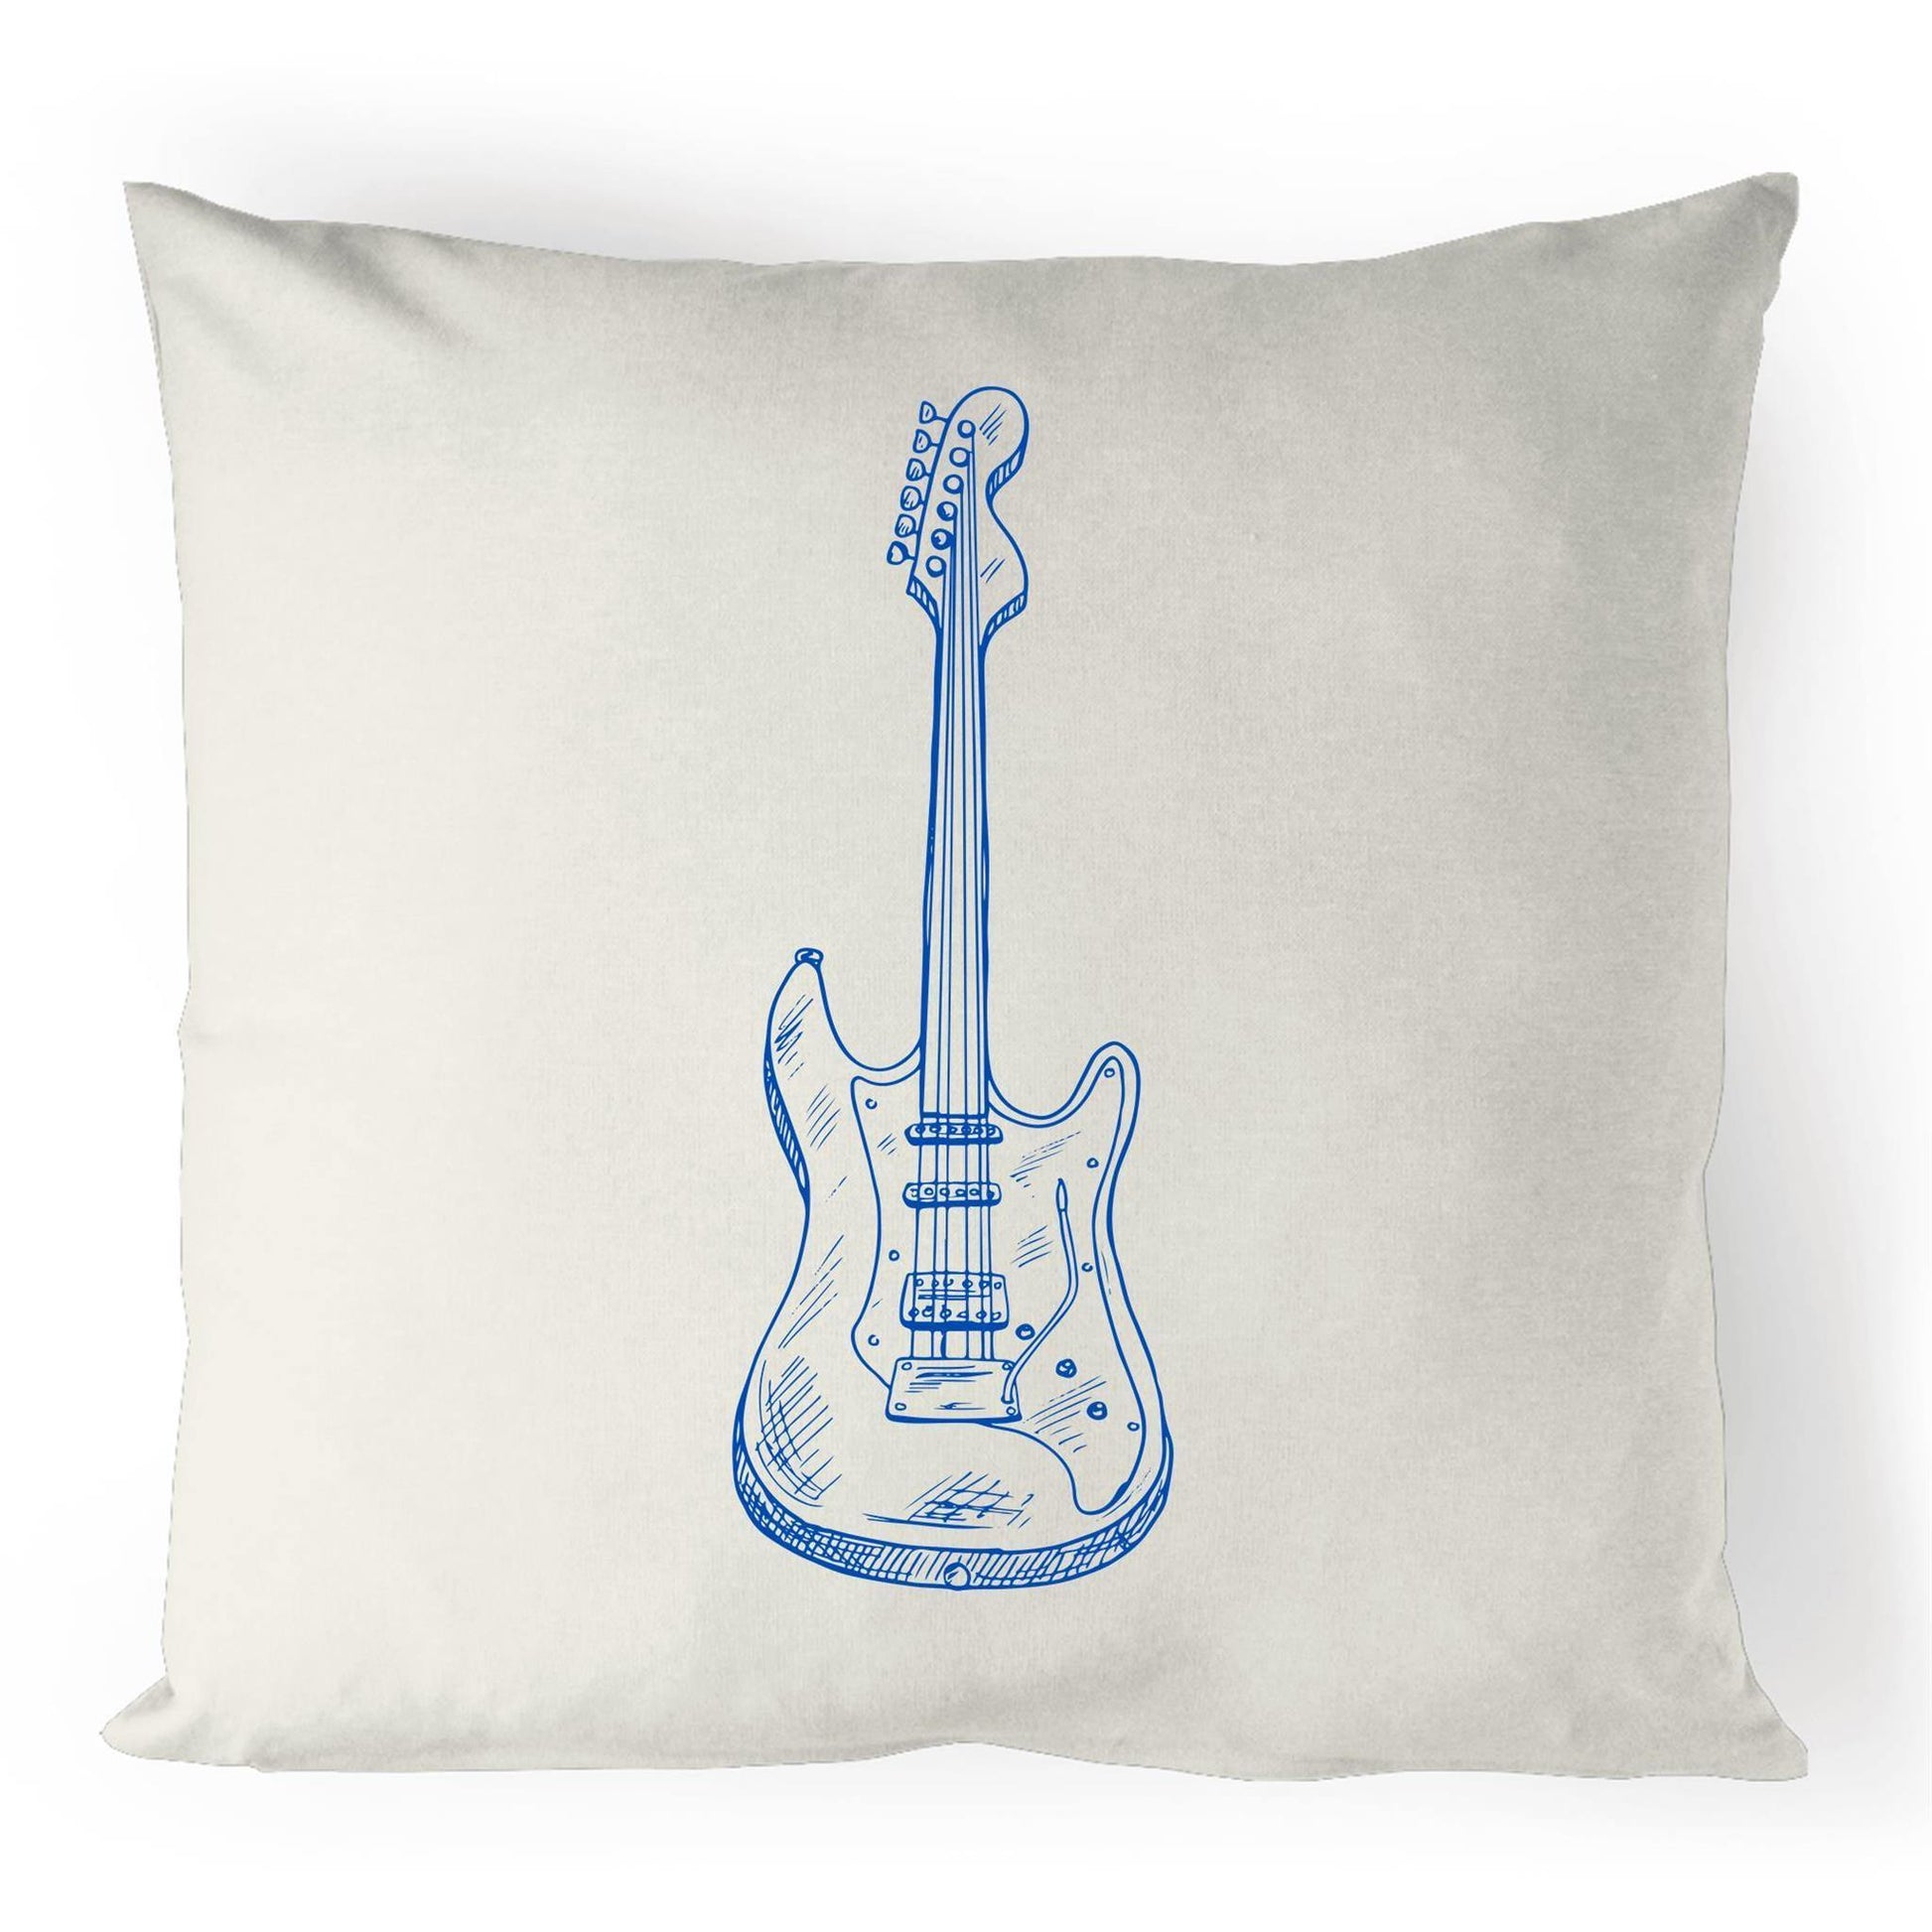 Guitar - 100% Linen Cushion Cover Natural One-Size Linen Cushion Cover Music